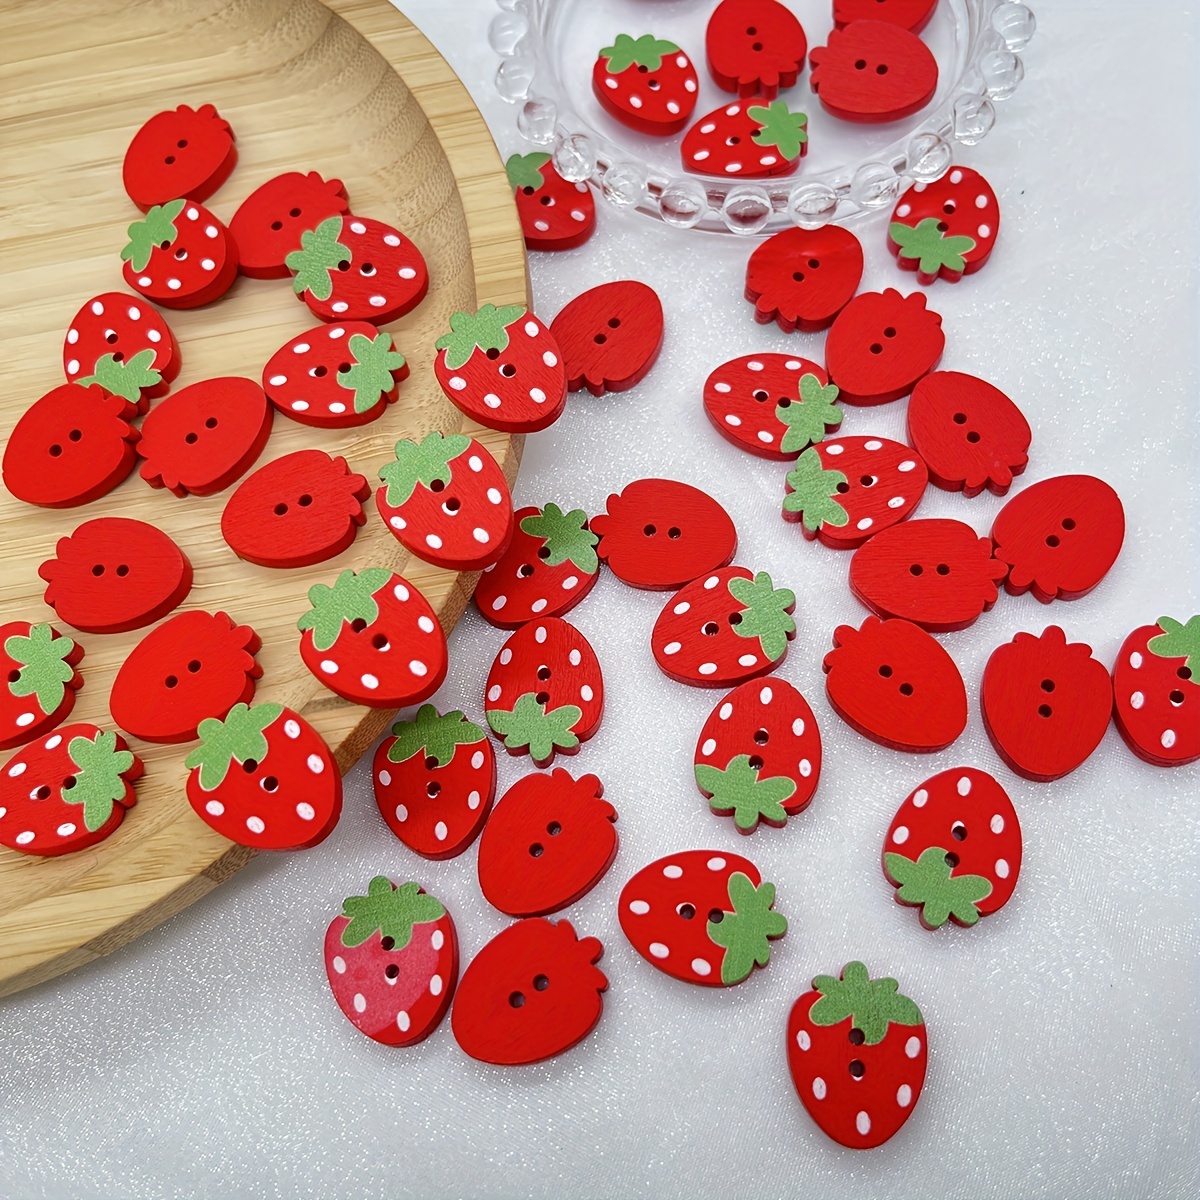  Red Heart Buttons For Sewing, Handmade Large Decorative Pieces  : Handmade Products